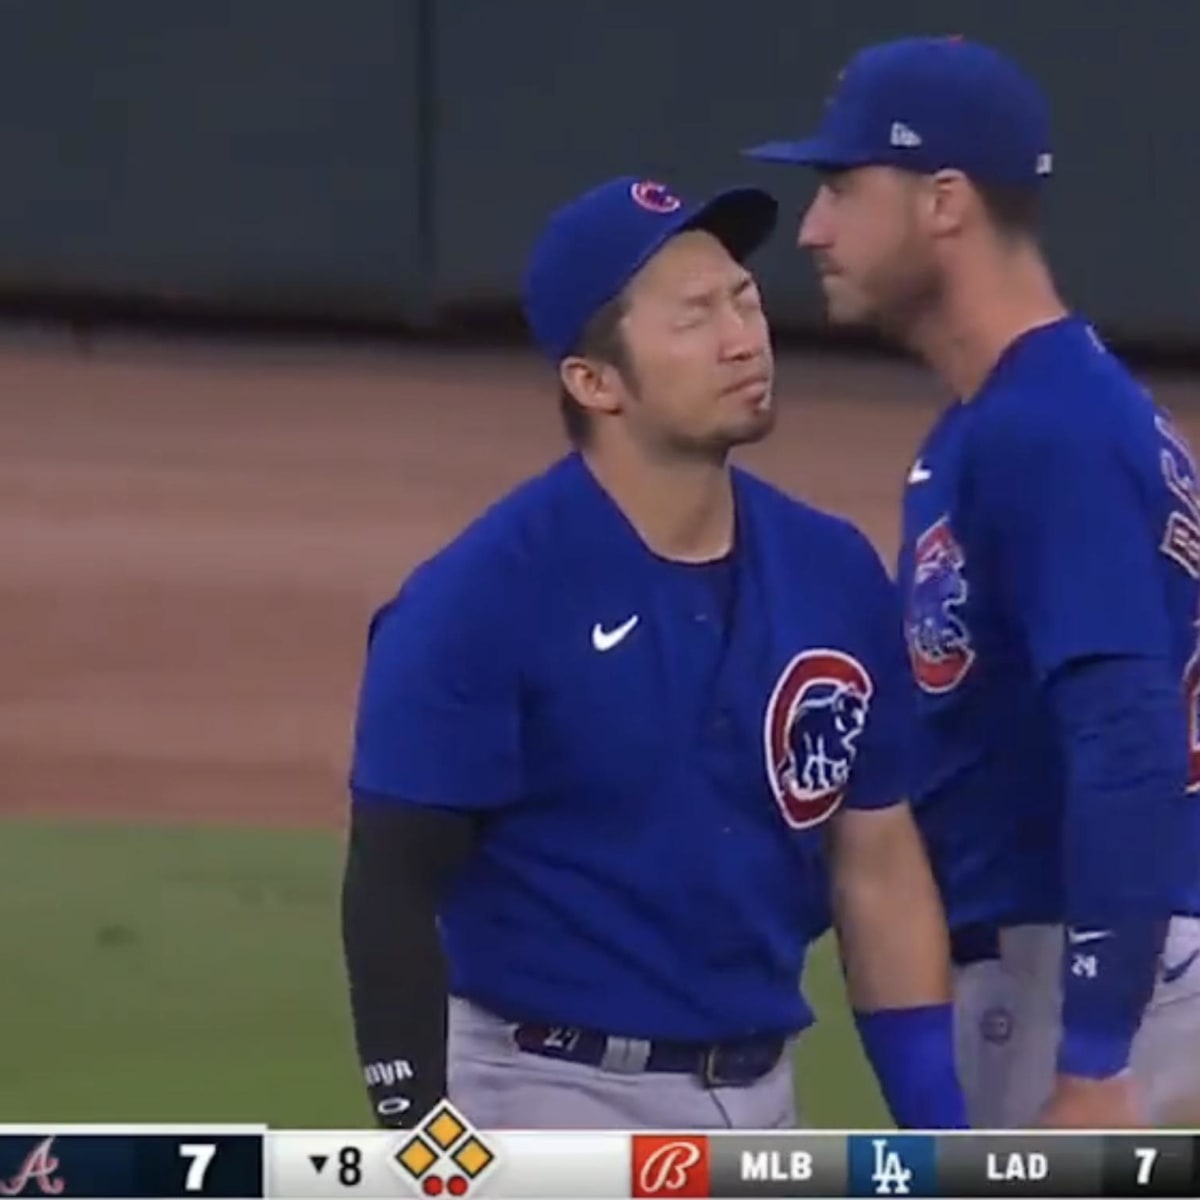 Cubs Lose Pivotal Game Thanks to a Little League-Type of Error by